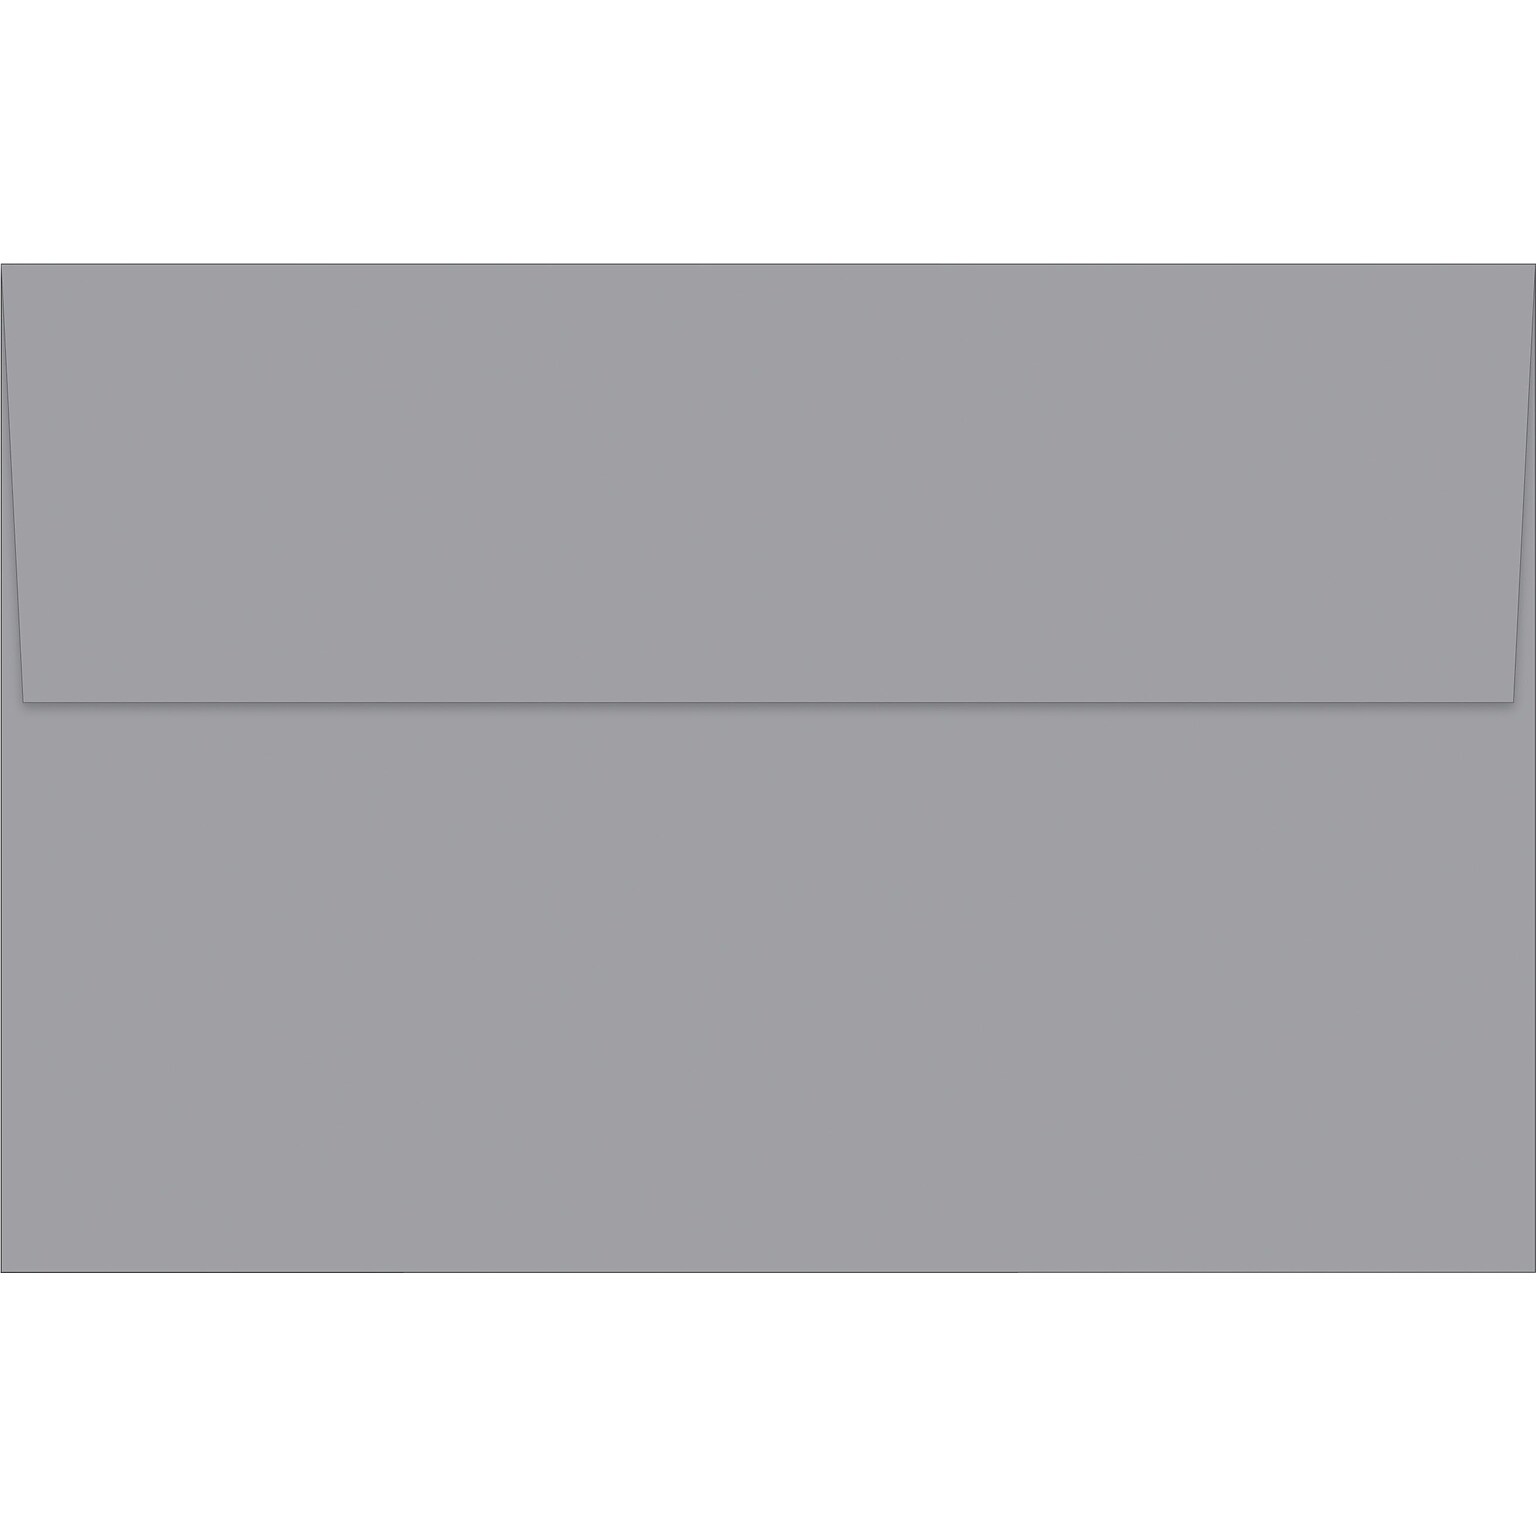 Great Papers® Grey A9 Envelopes, 40/Pack